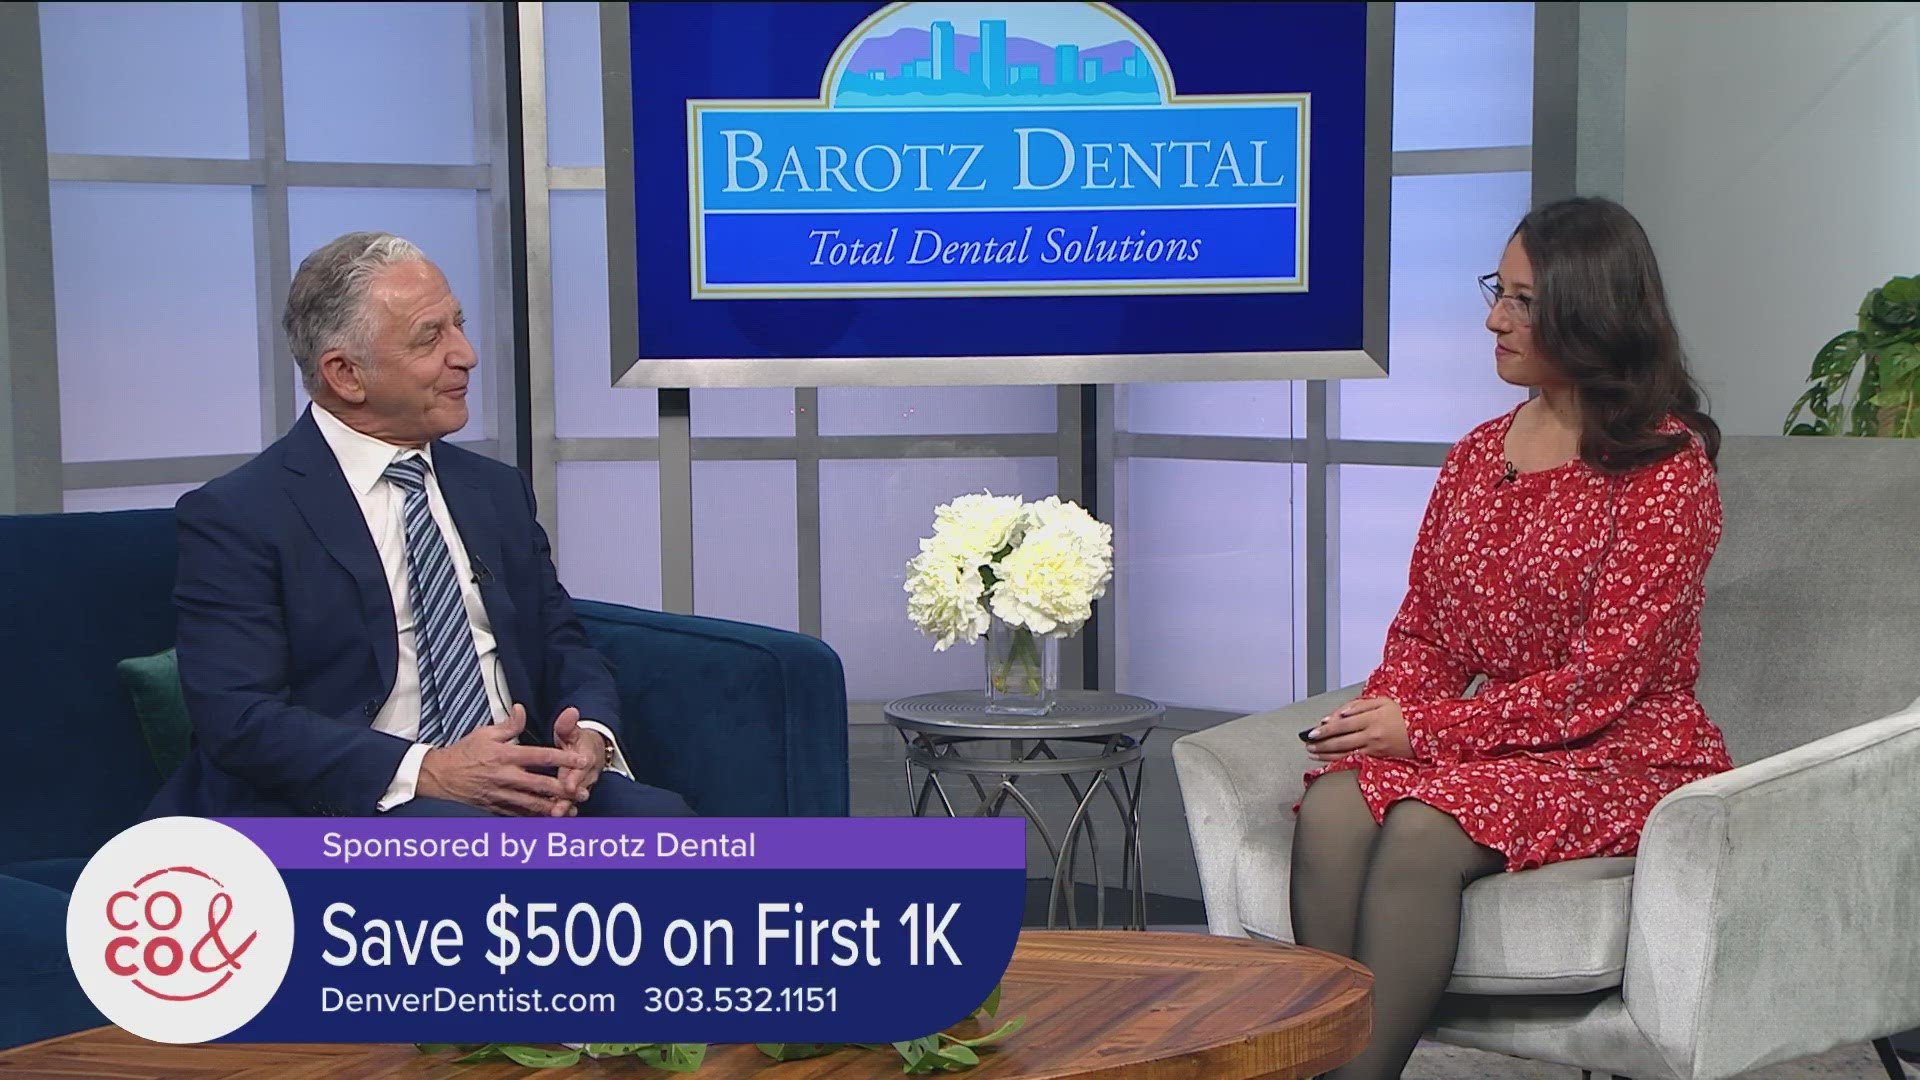 The first 20 callers to 303.532.1151 will get $500 off the first $1000 in treatment, or a free CT Scan. Learn more at DenverDentist.com. **PAID CONTENT**